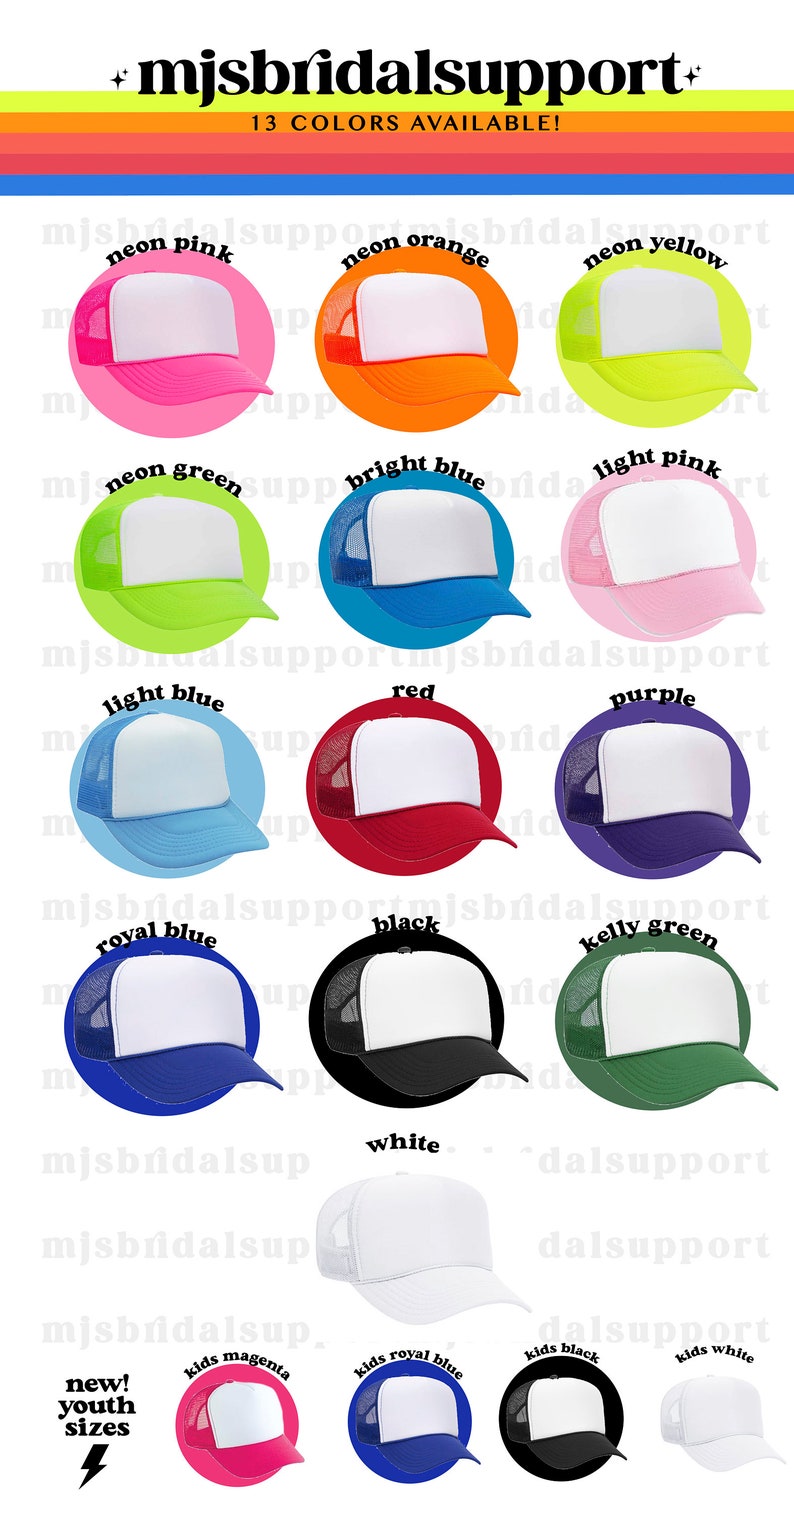 Custom Birthday FACE Hats Party Favor for Birthday Celebration Name is the BIG 30 40 50 60 70 Any Age Small Party hat on Head Added image 3